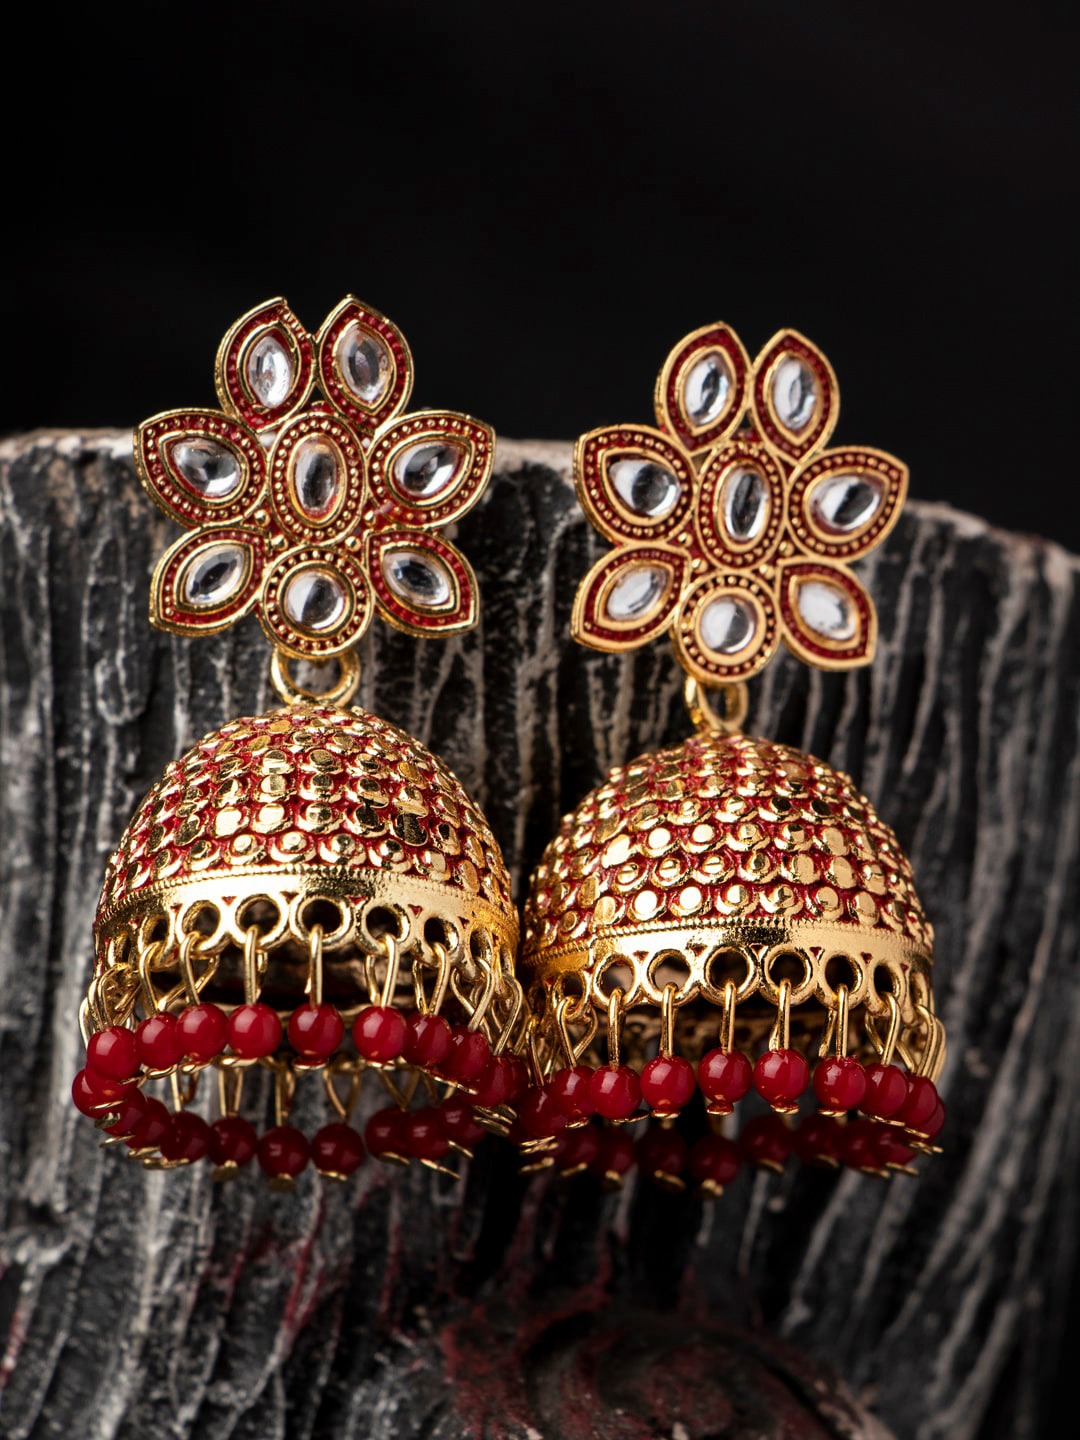 Women's Red Contemporary Jhumkas Earrings - Morkanth